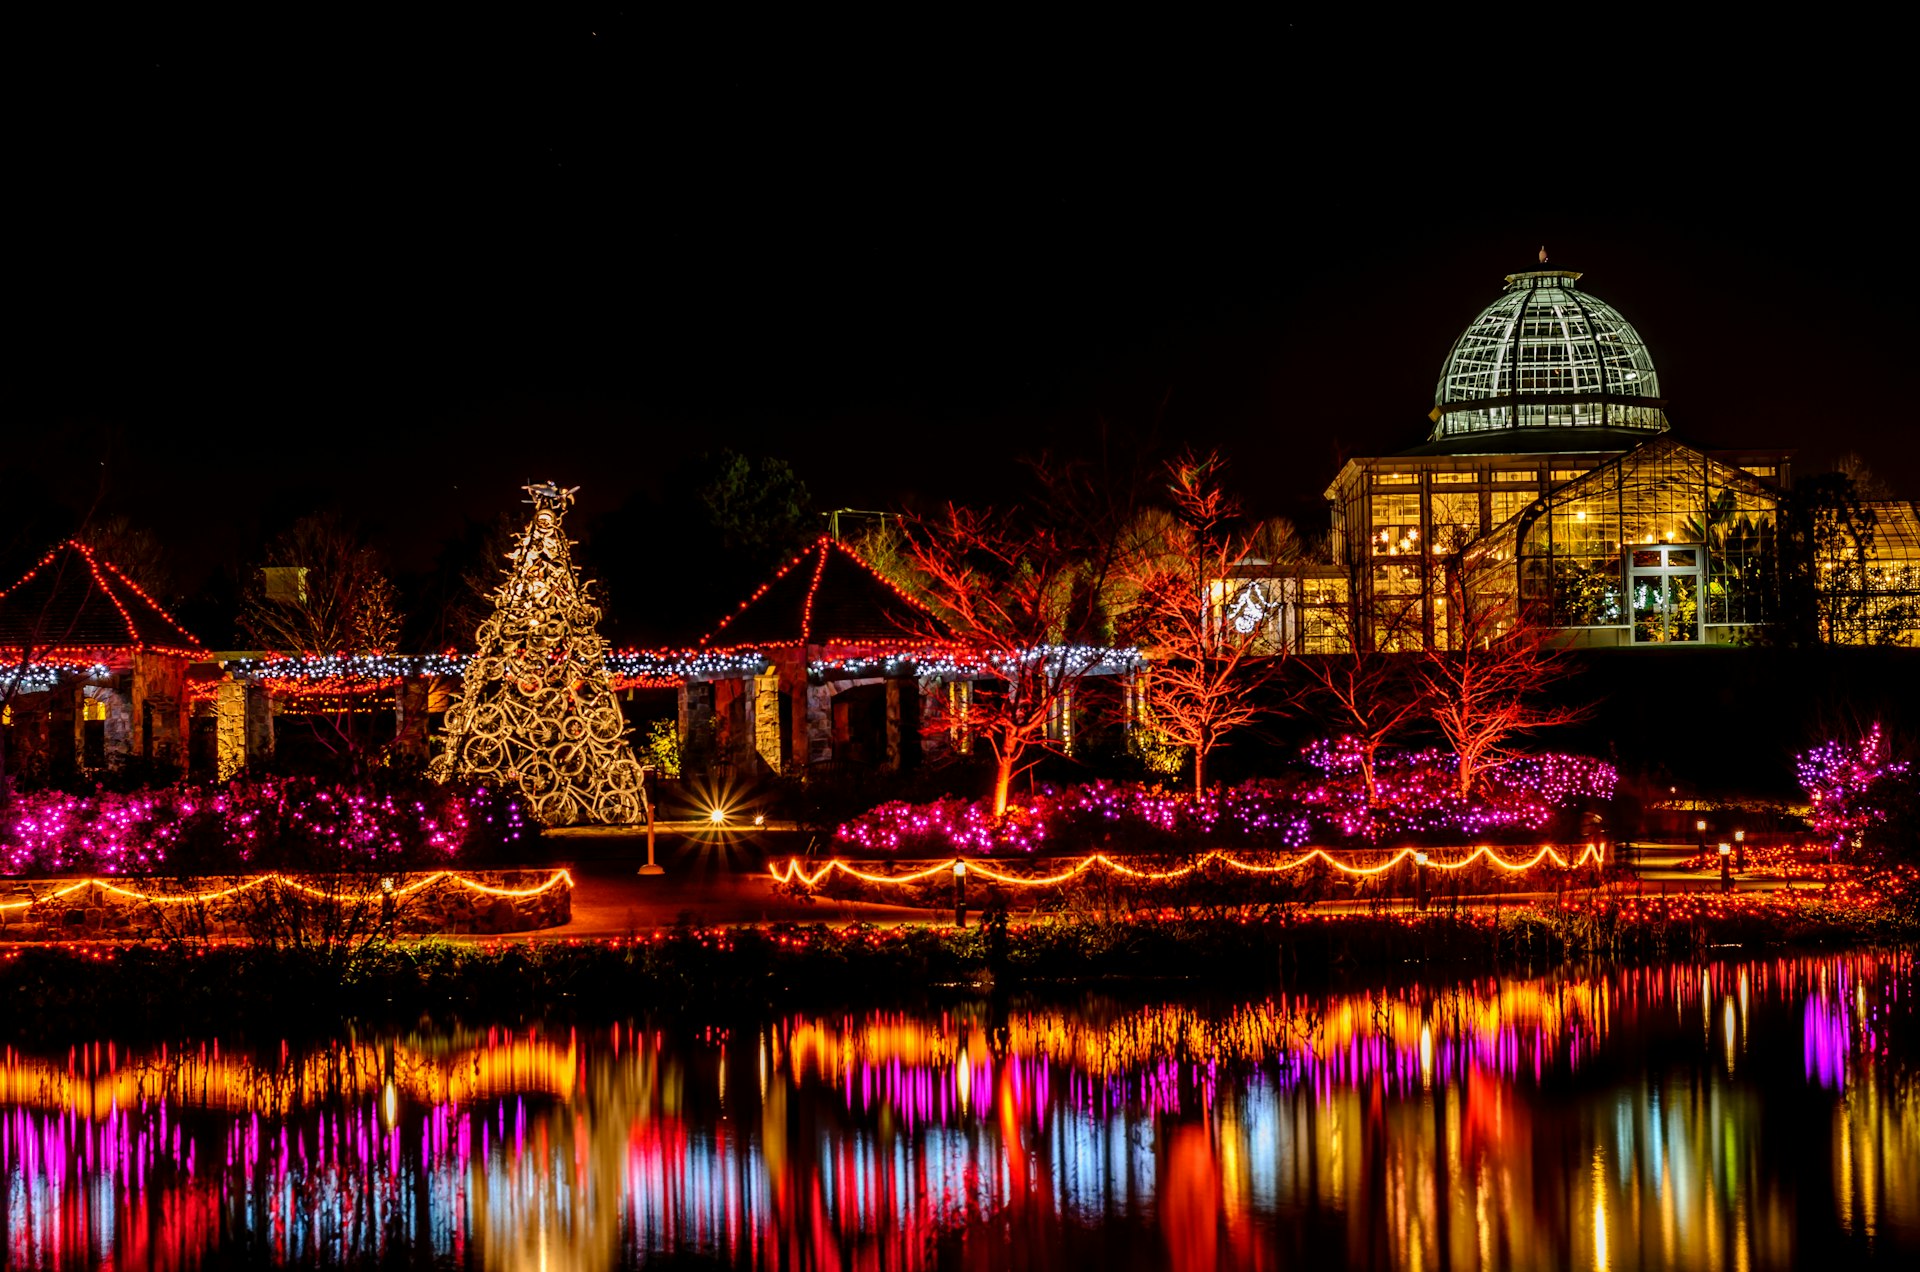 GardenFest of Lights event at the Lewis Ginter Botanical Gardens in Richmond, Virginia